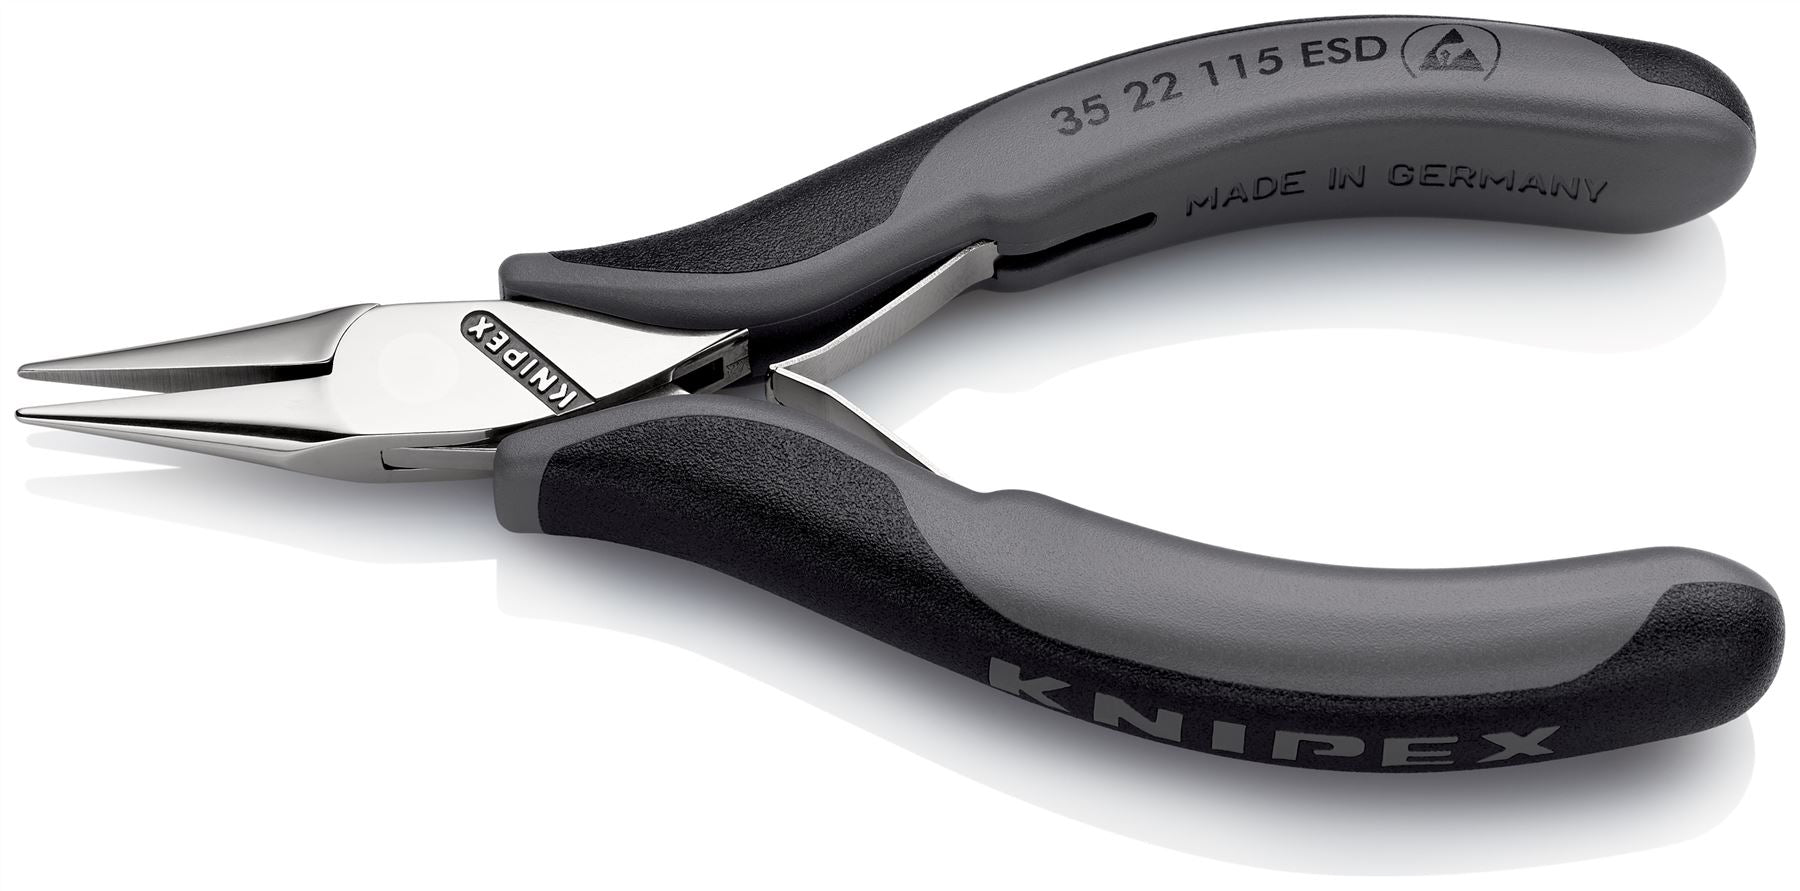 KNIPEX Precision Electronics Gripping Pliers ESD 115mm Black/Grey Multi Component Grips 35 22 115 ESD